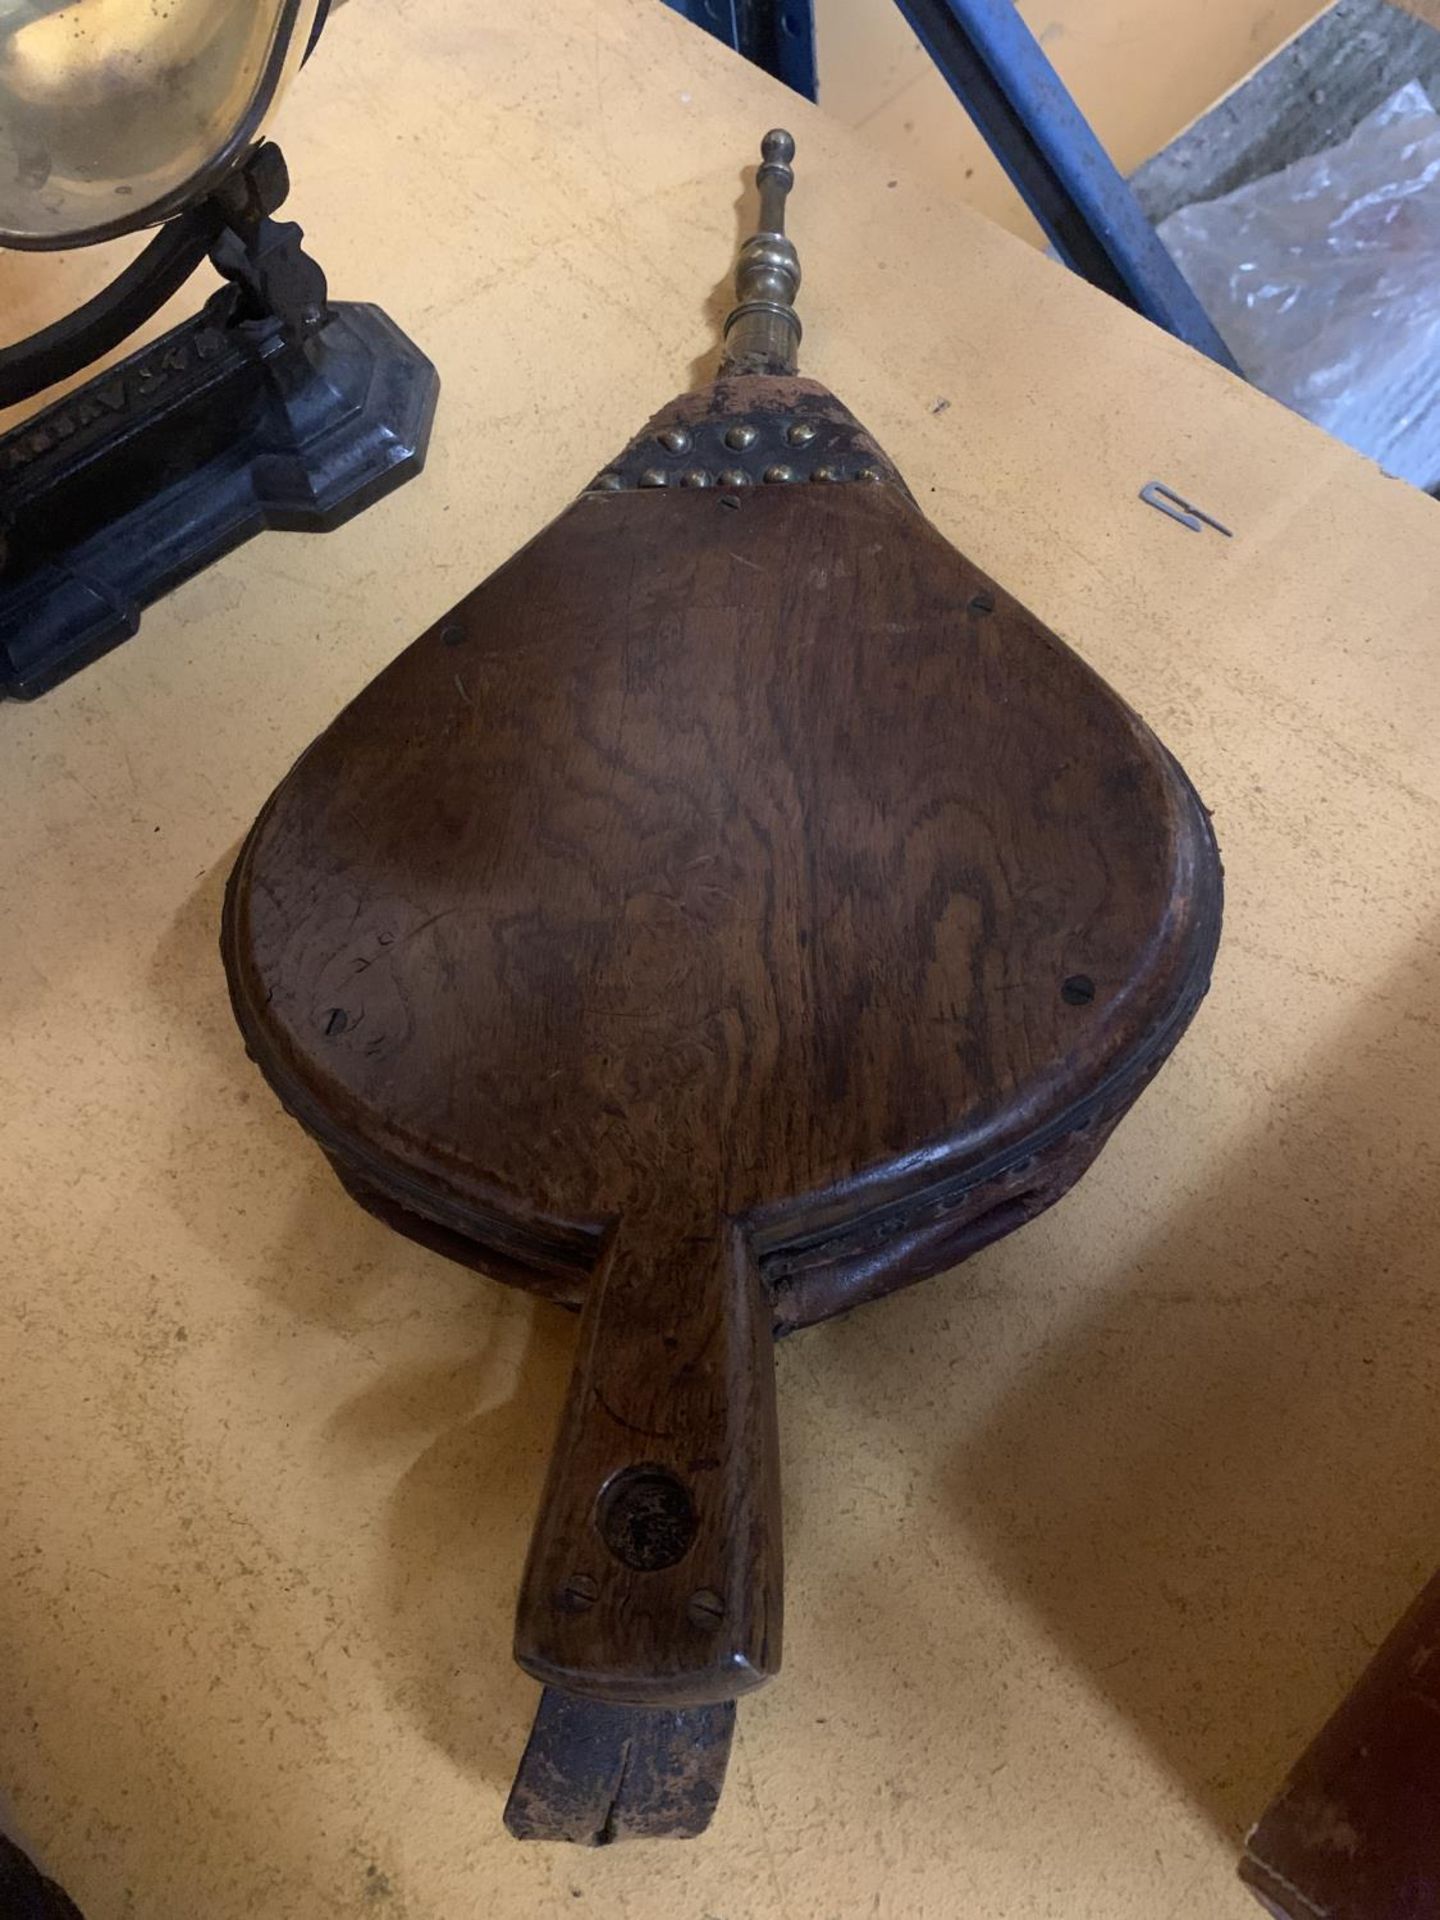 A PAIR OF VINTAGE WOODEN BELLOWS